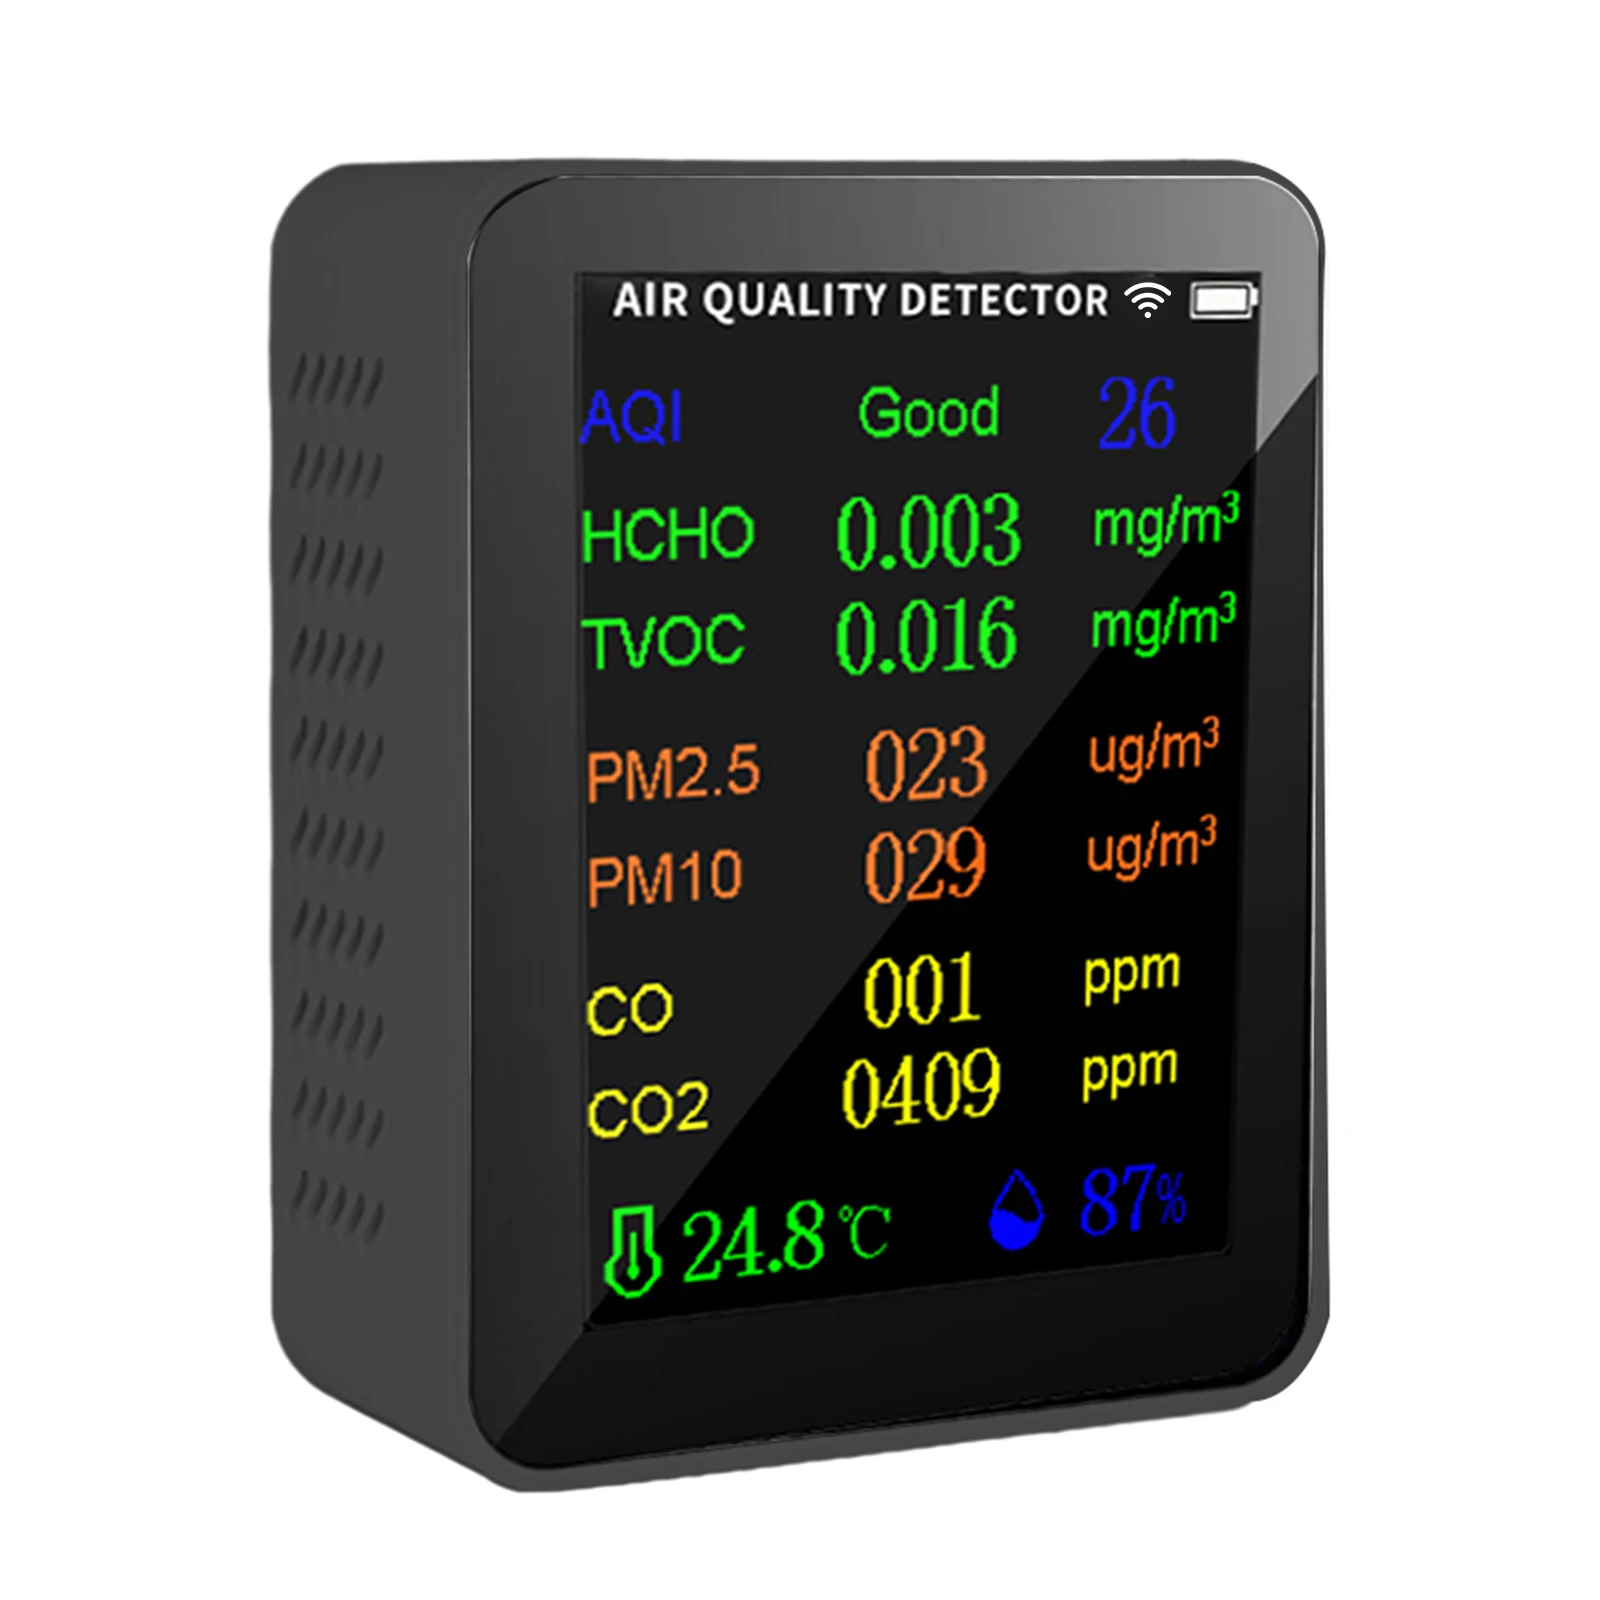 

1pc Air Quality Meter Infrared PM2.5 Temperature Humidity Sensor 10 In1 PM2.5 PM10 HCHO AQI Temperature Humidity Tester